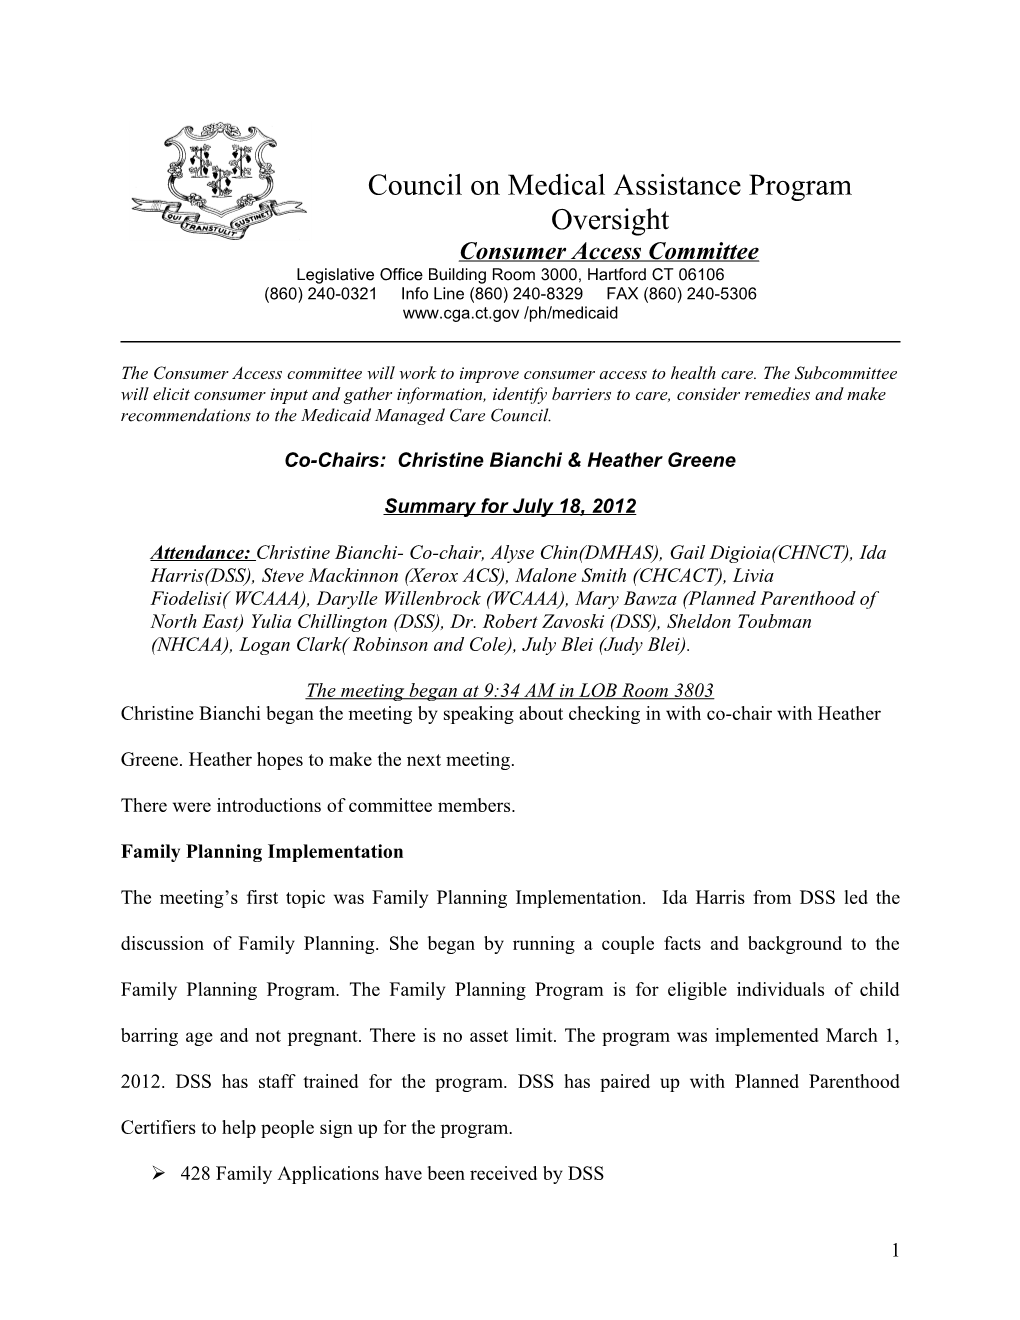 Council on Medical Assistance Program Oversight s1